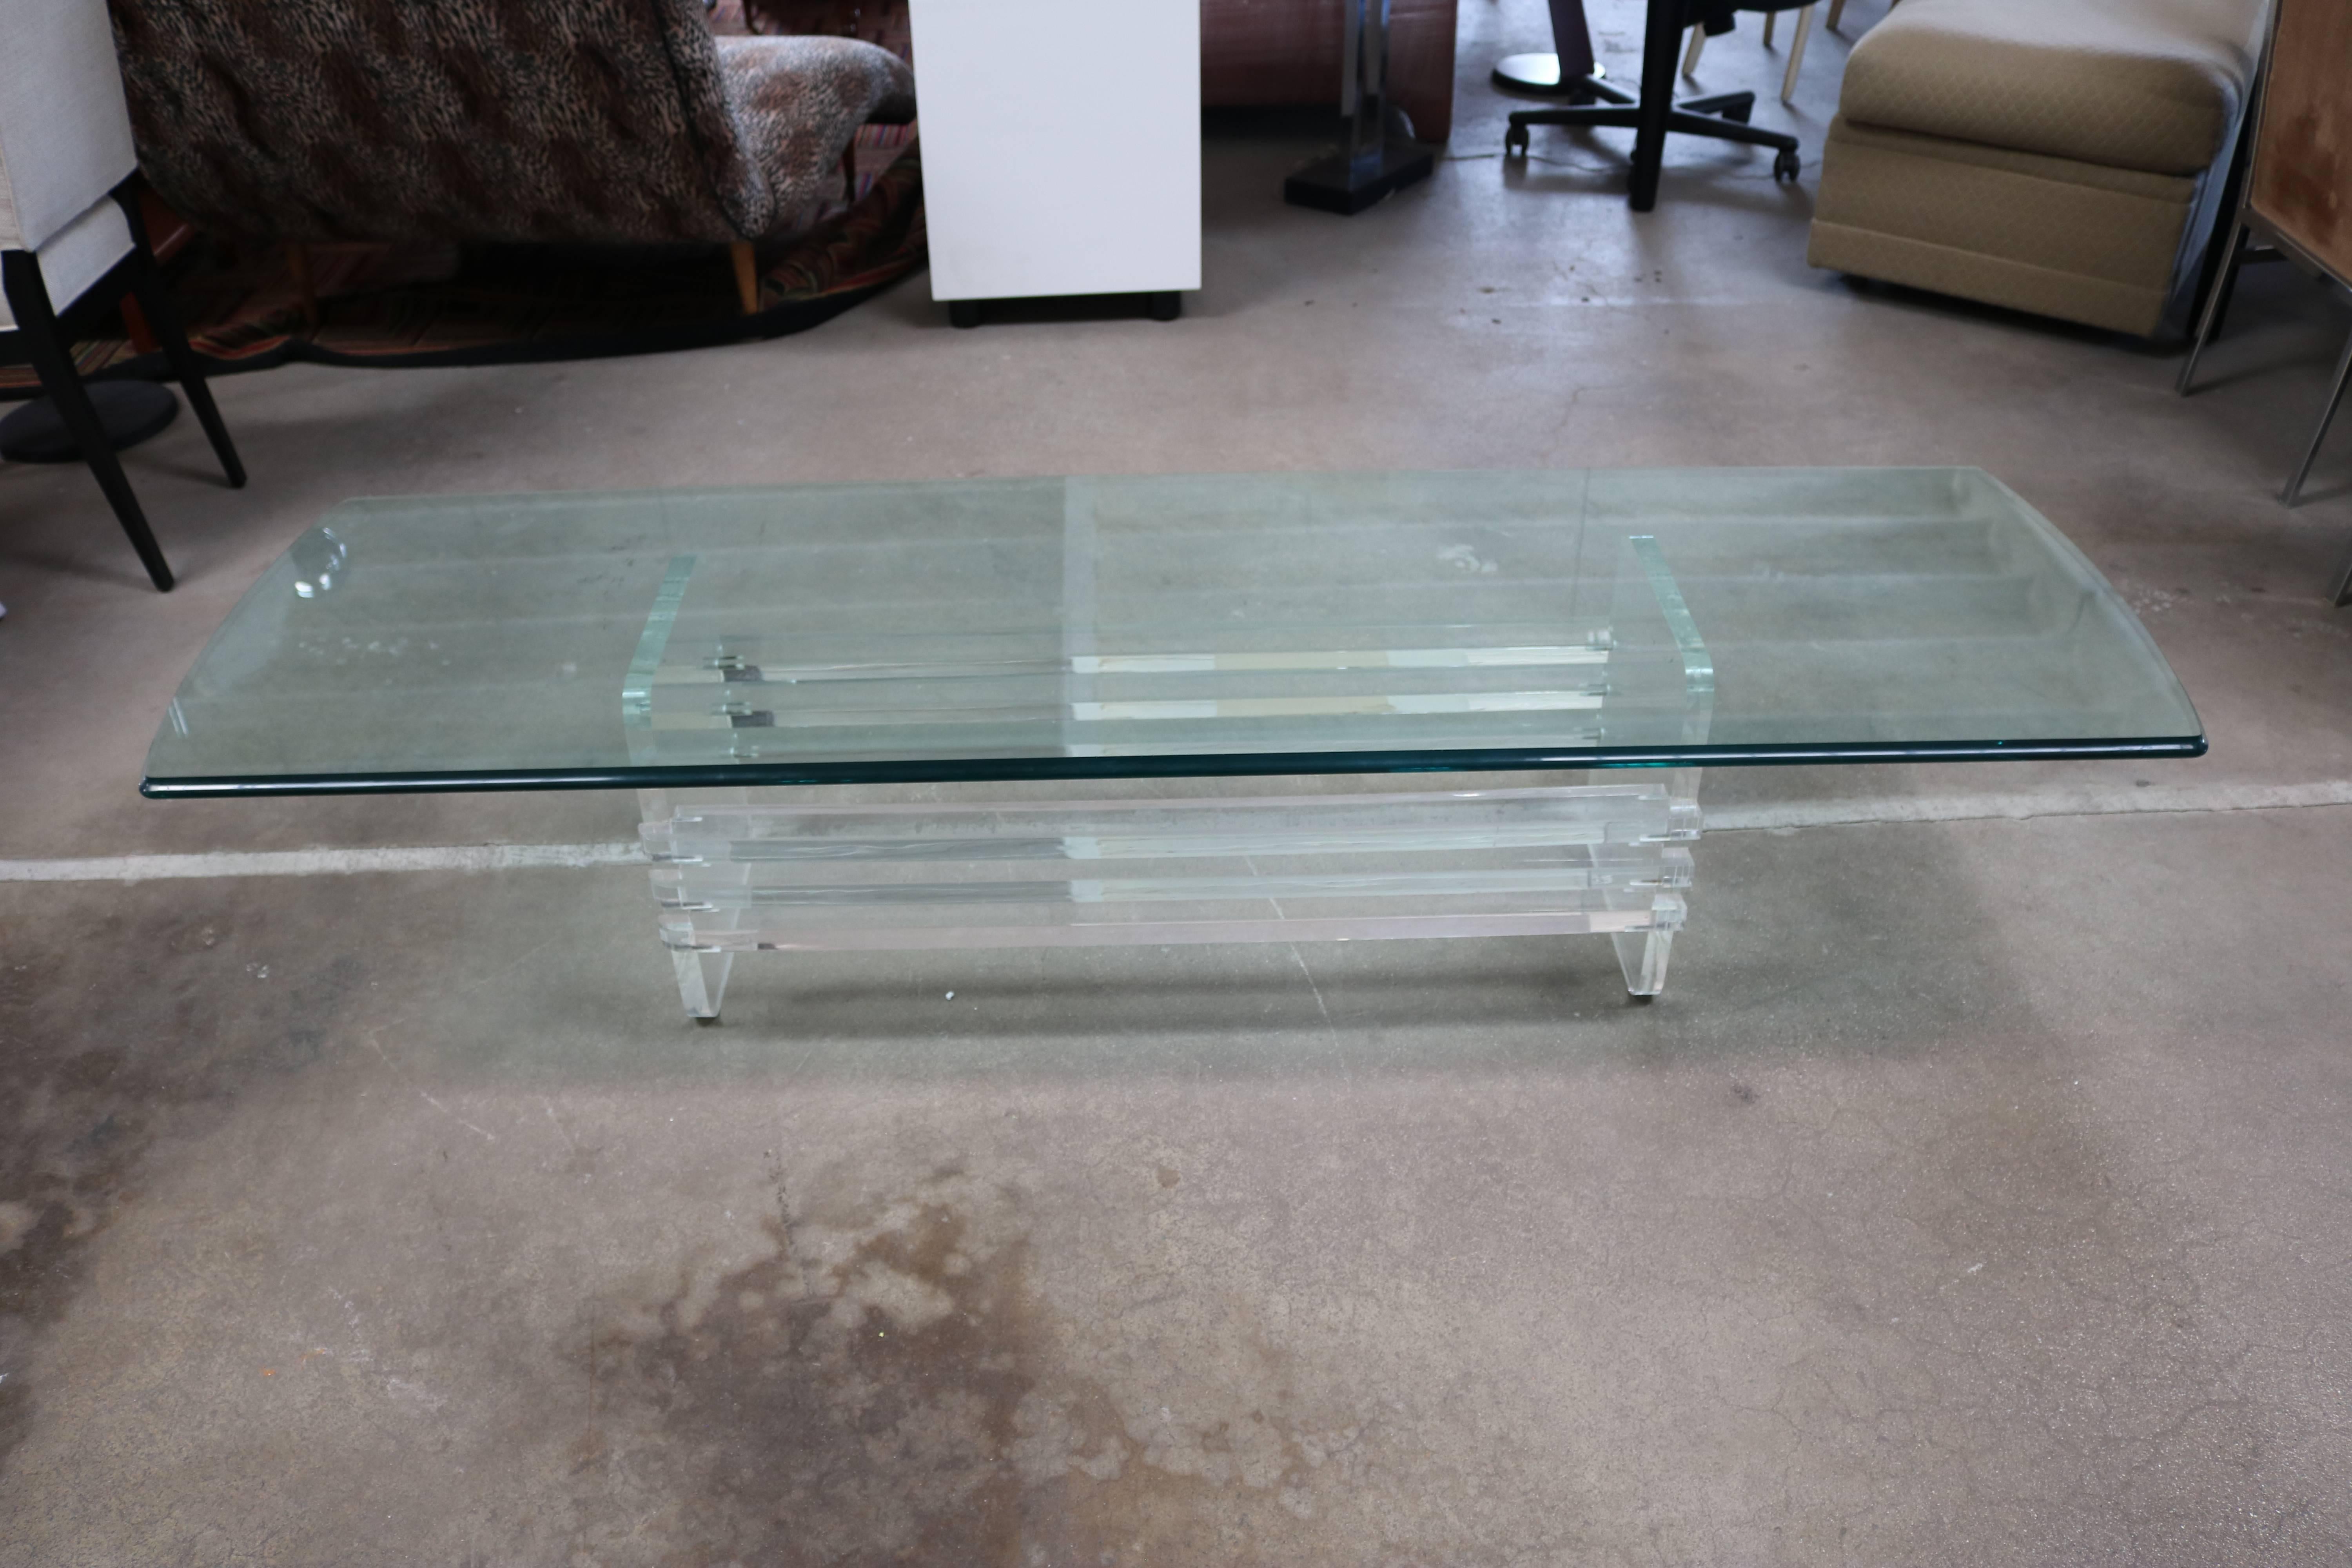 This long coffee table is made up of Lucite slats attached to two end pieces with a long rectangular glass top.